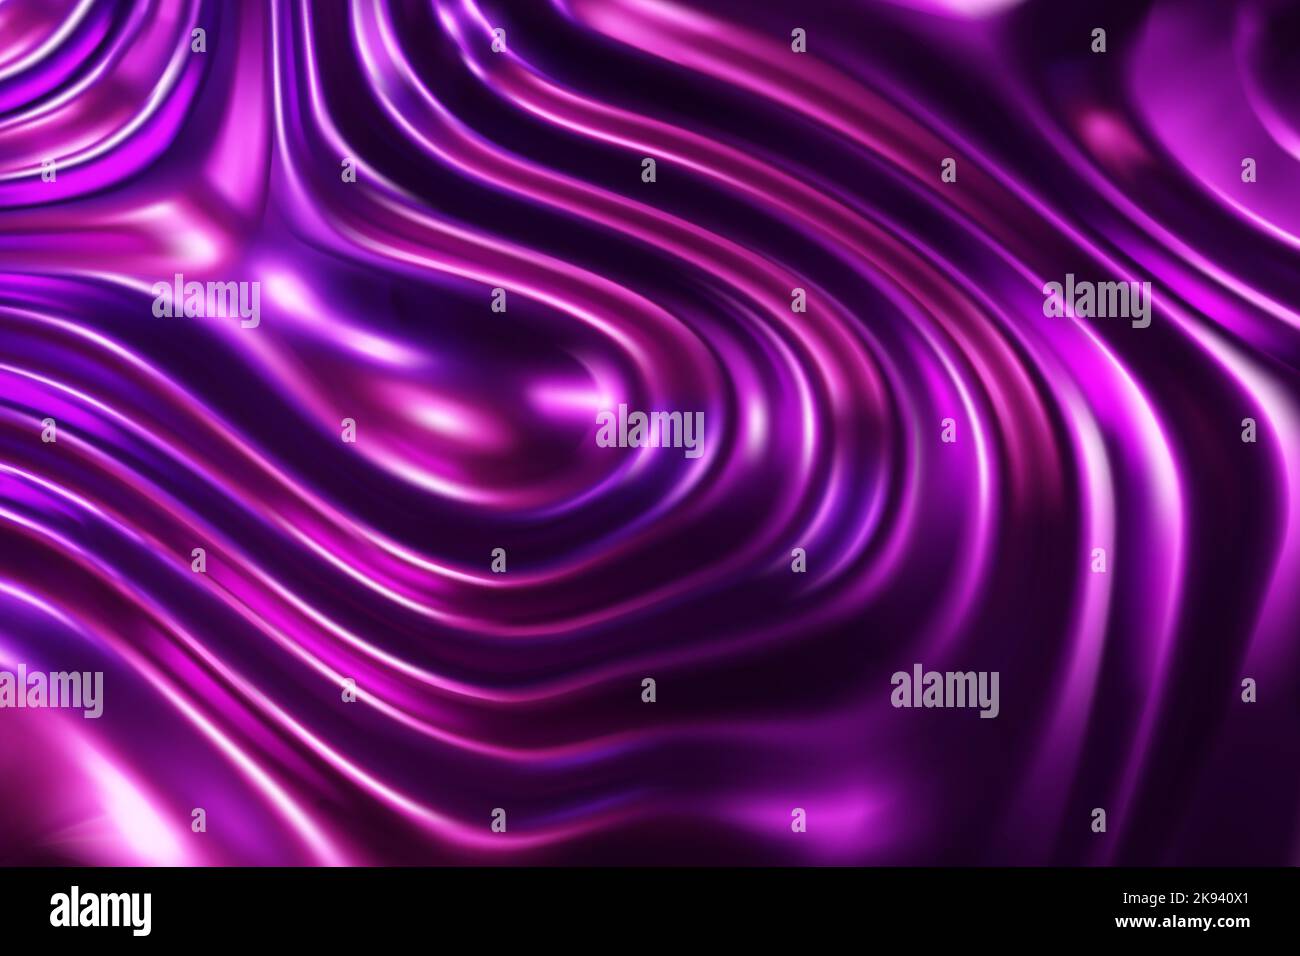 Purple liquid molten metal abstract wavy background with light reflects Stock Vector